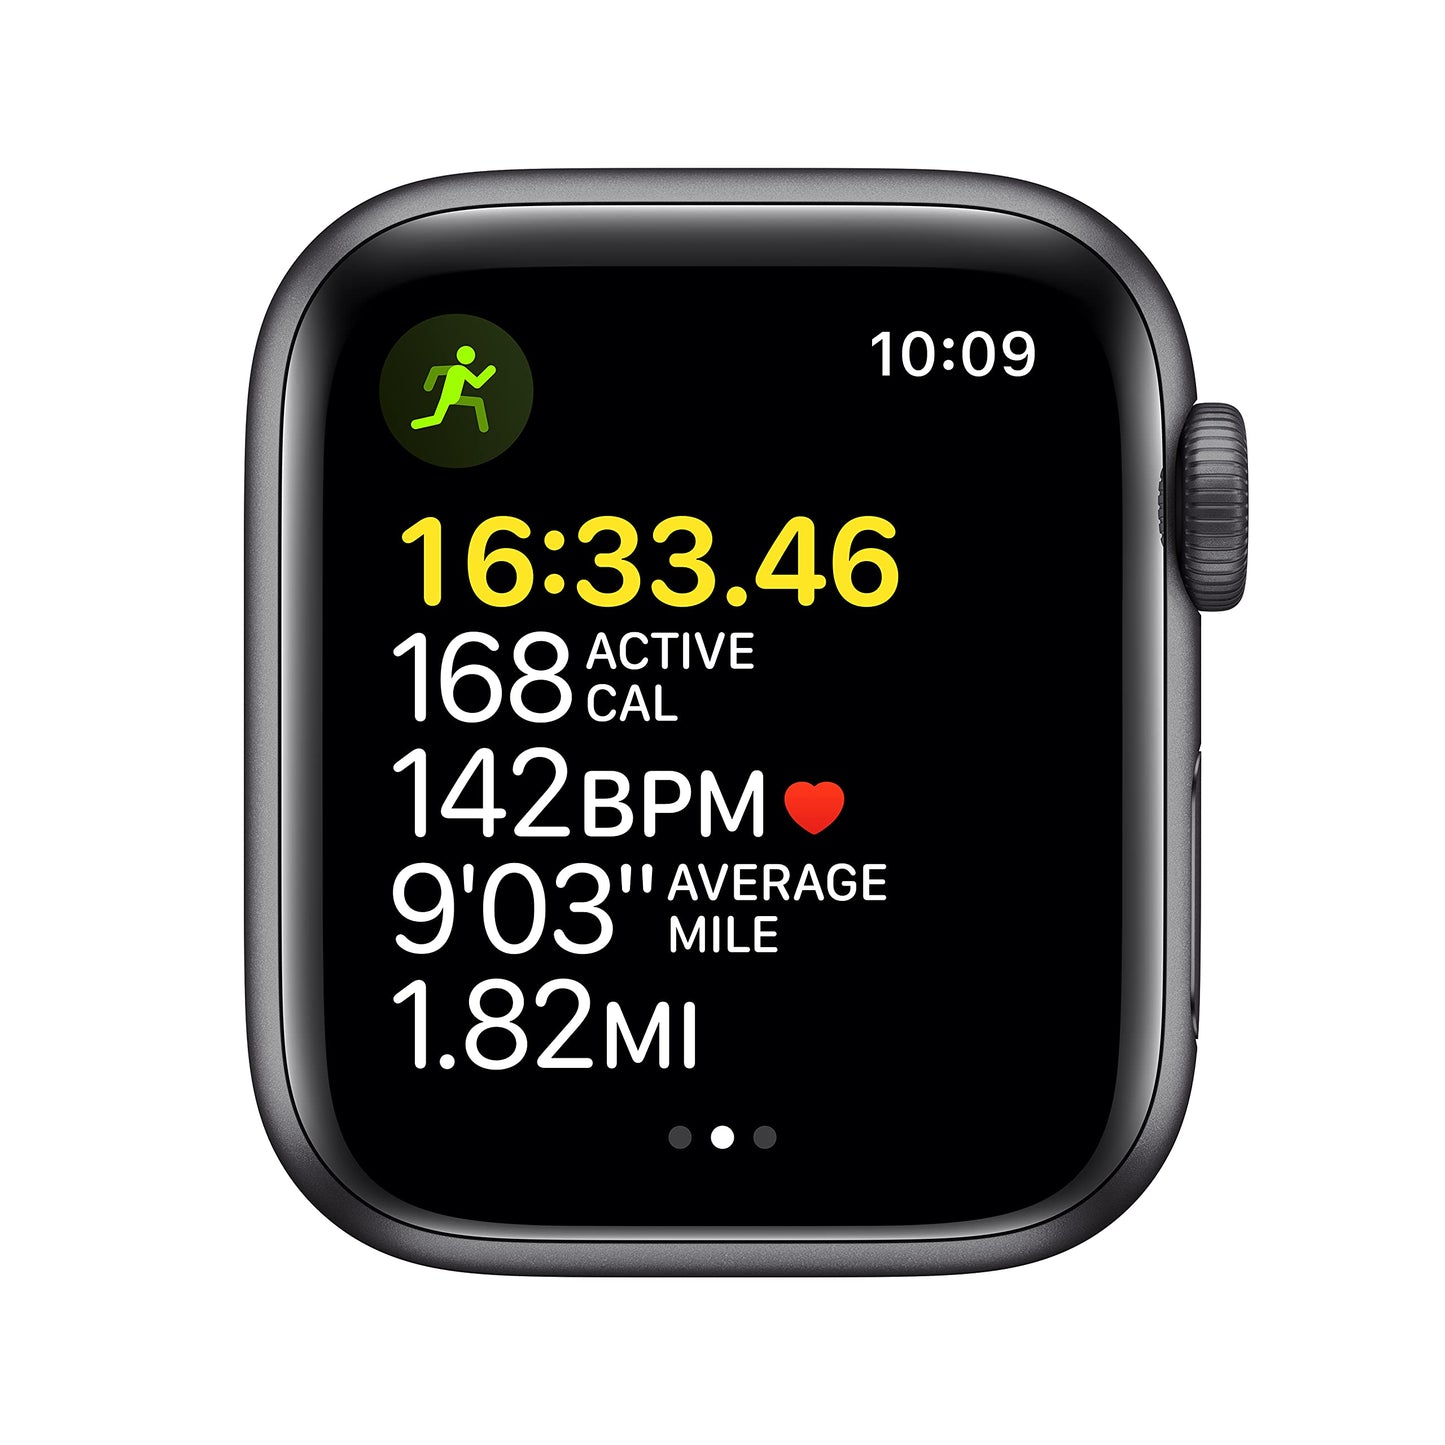 Apple Watch SE (Gen 1) [GPS 40mm] Smart Watch w/Space Grey Aluminium Case with Midnight Sport Band. Fitness & Activity Tracker, Heart Rate Monitor, Retina Display, Water Resistant - Like New